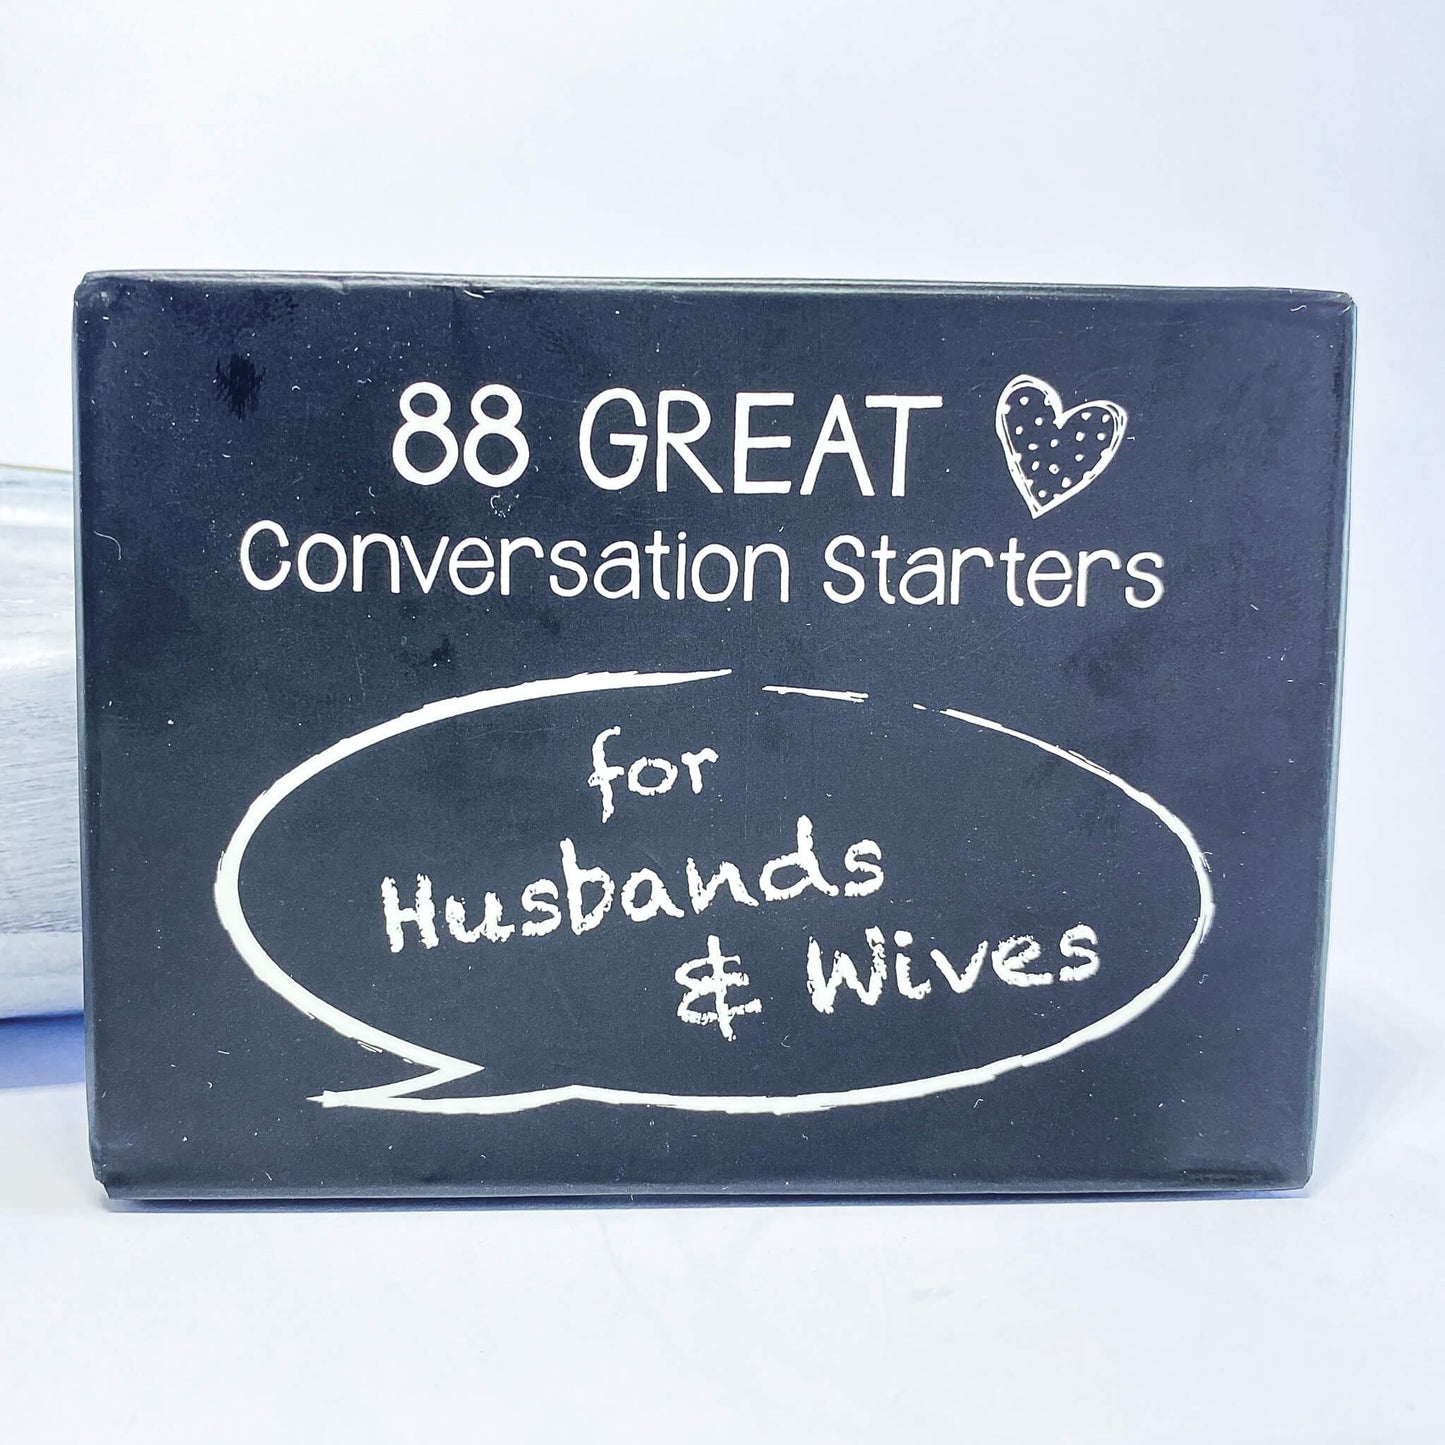 88 Great Conversation Starters for Husbands and Wives